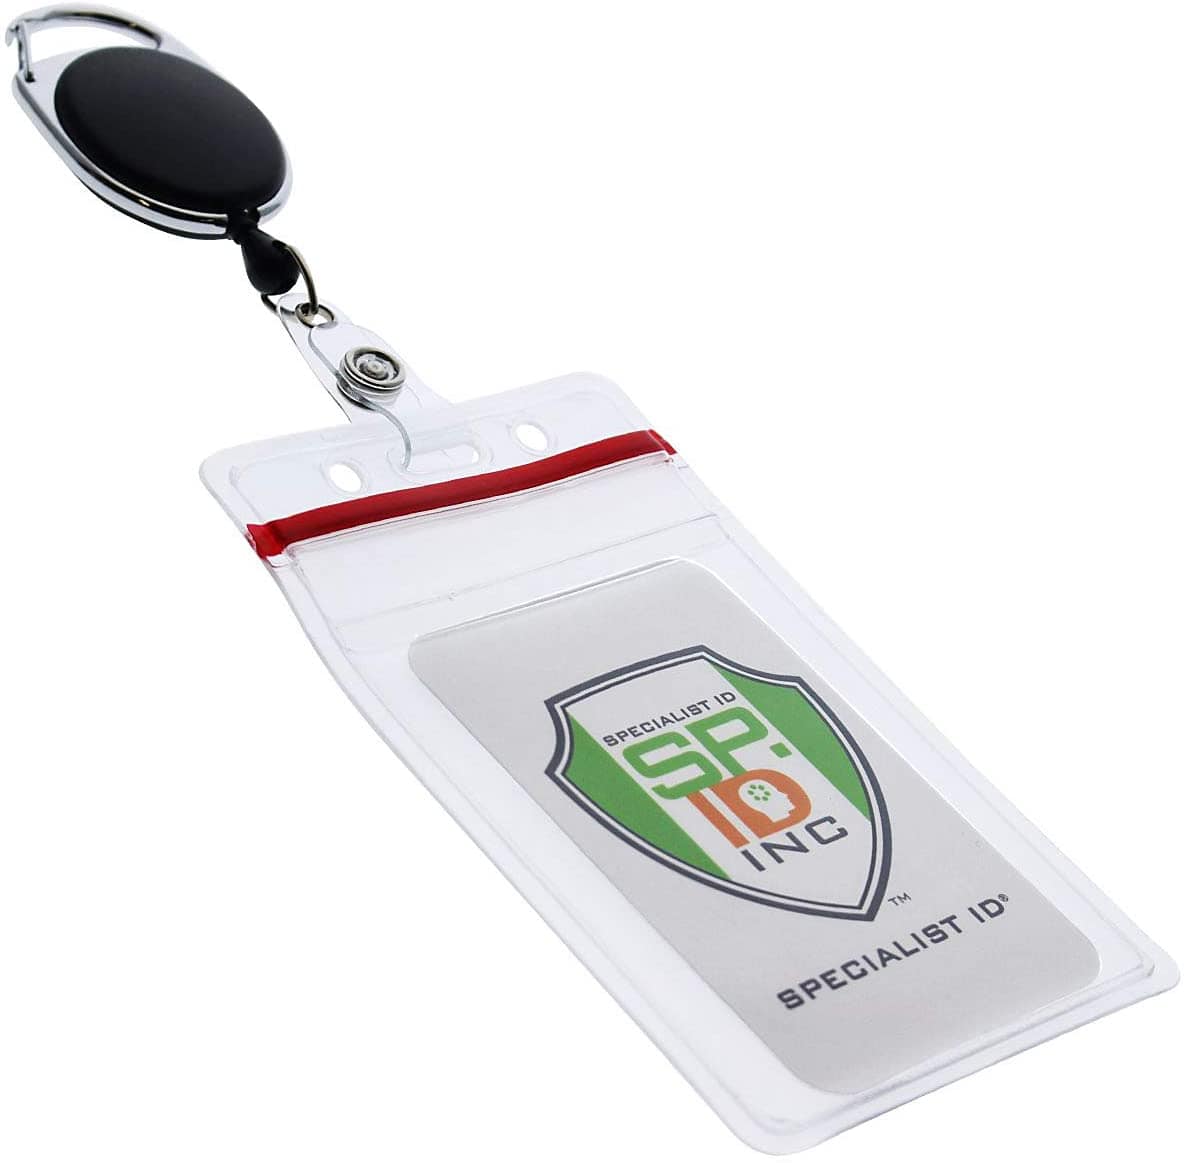 A Heavy Duty Vertical Multi-Card Badge Holder with Resealable Zip Top (1815-1110) with a black retractable cord, attached to a heavy-duty vinyl badge holder with a resealable top, displaying a clear vertical ID display featuring the green, orange, and white Specialist ID, Inc. logo.